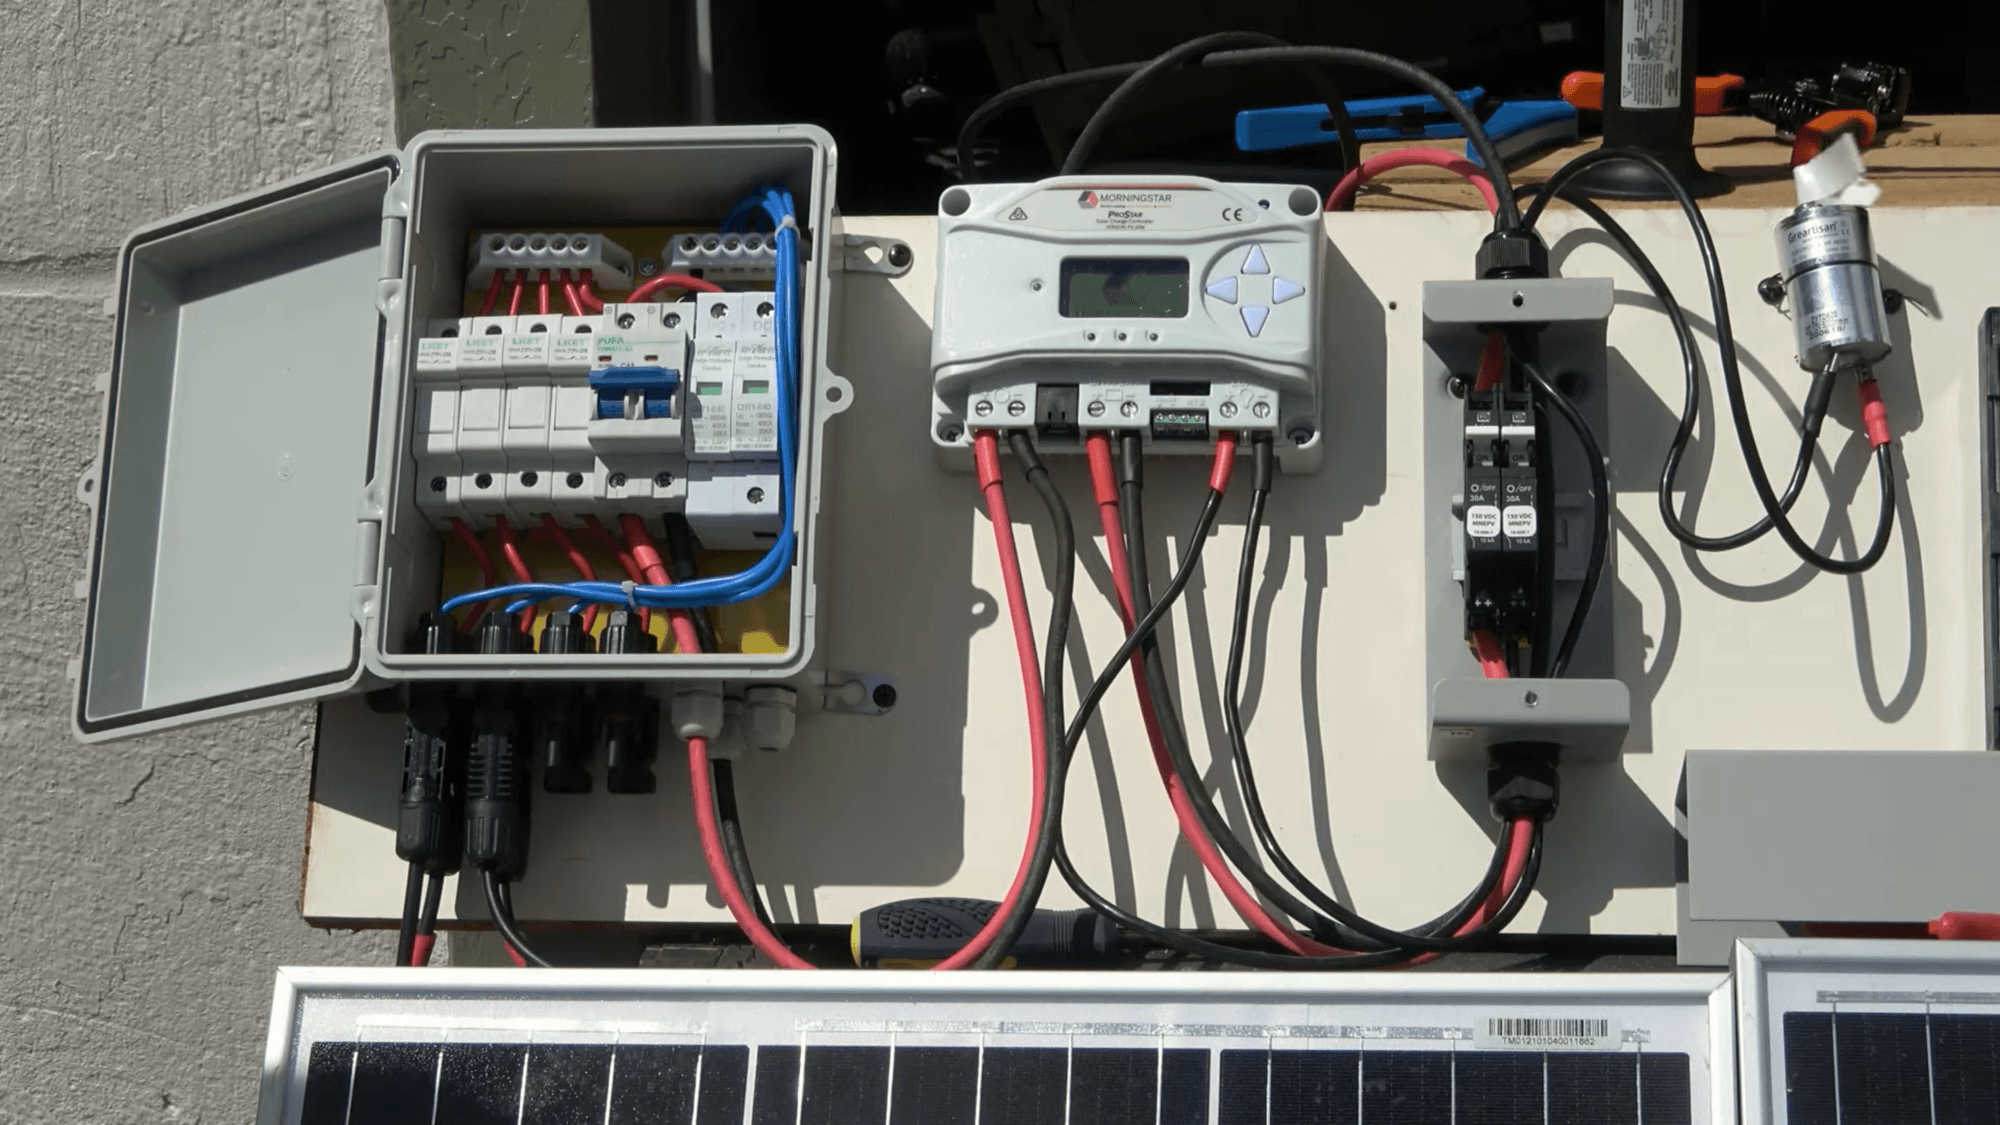 Wiring a simple solar photovoltaic (PV) system with a combiner box, charge controller, and breaker box